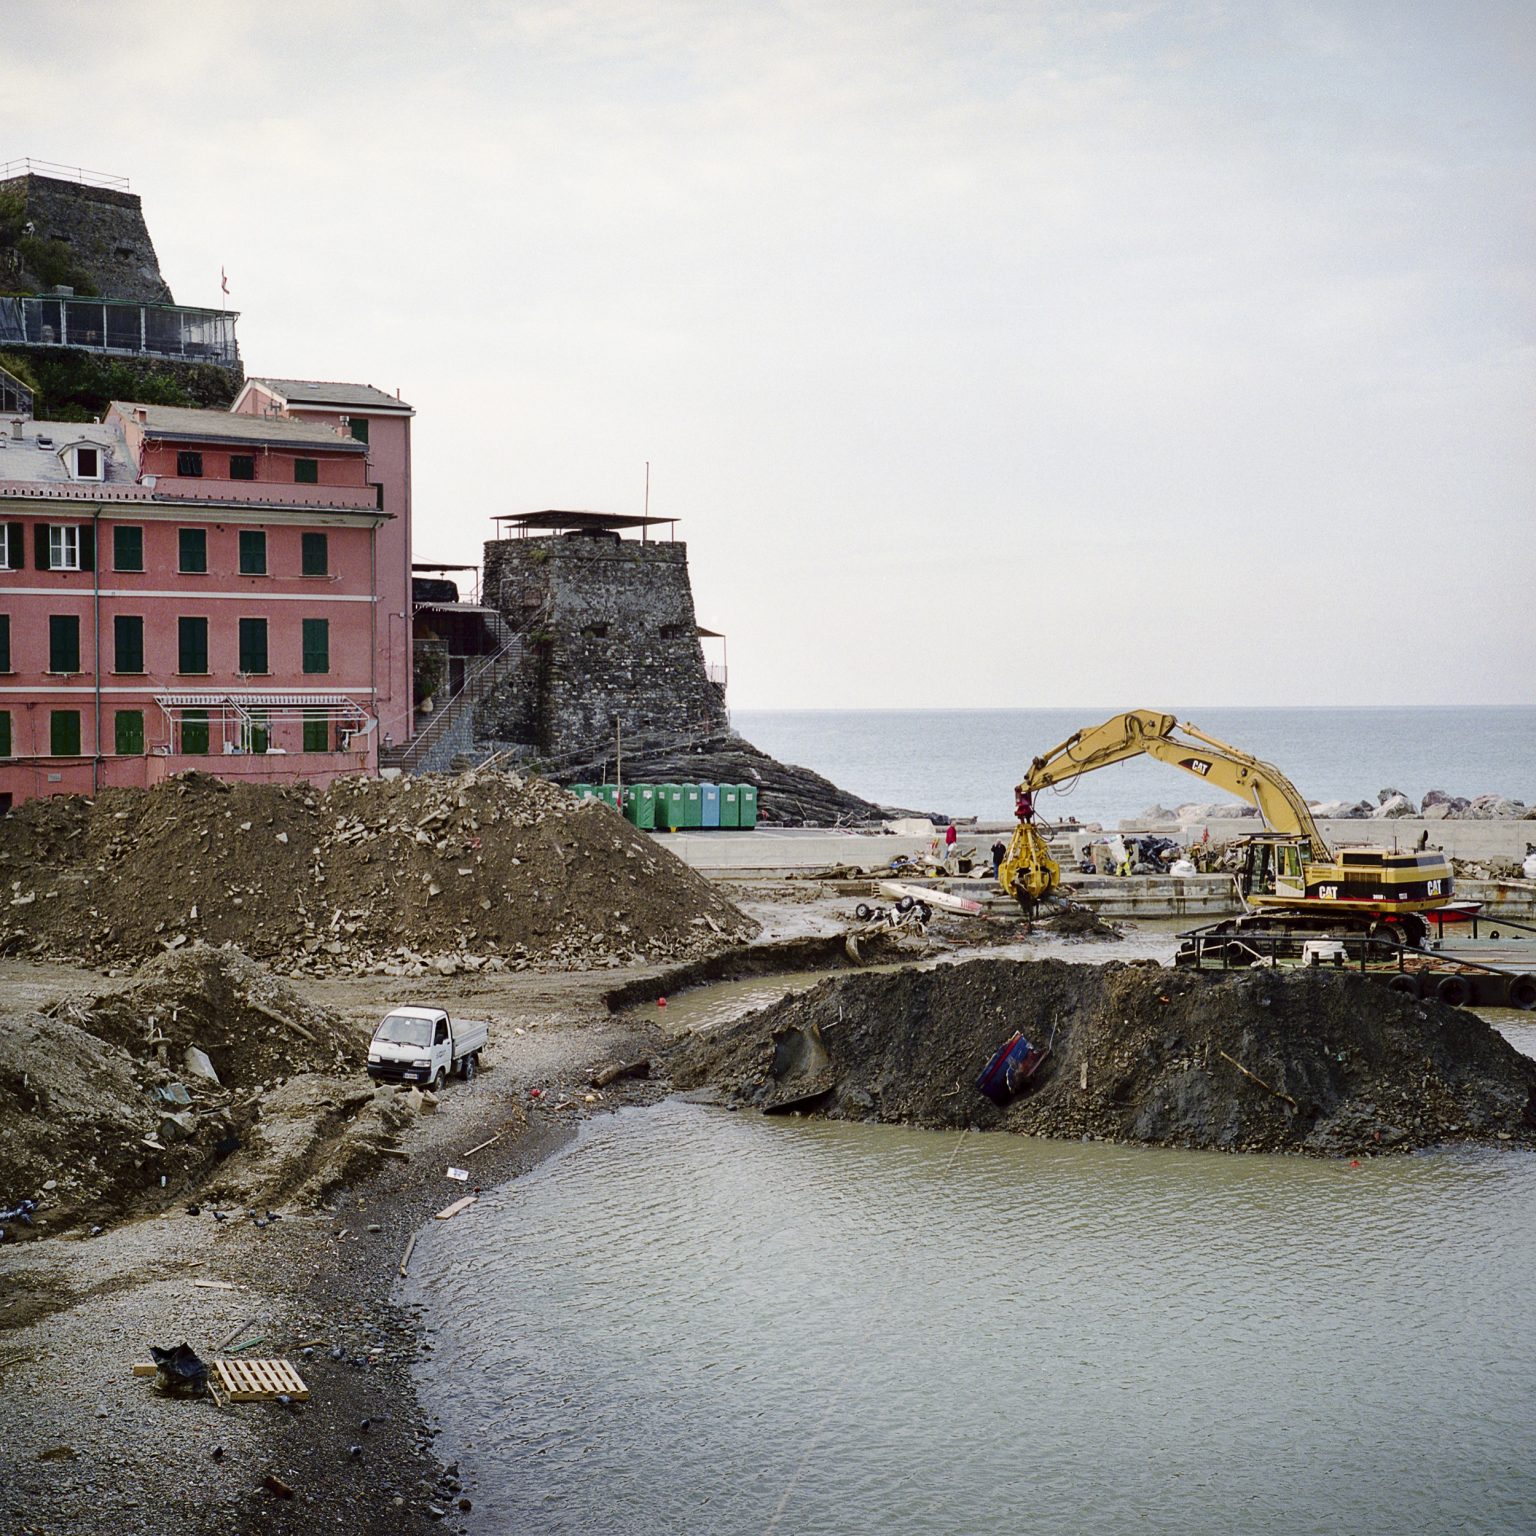 Vernazza, November 2011. After the intense rain the town was hit by a severe flood that caused much damage to the buildings and economic activities. On the seashore all the mud is taken after it was pulled out from streets and apartments.